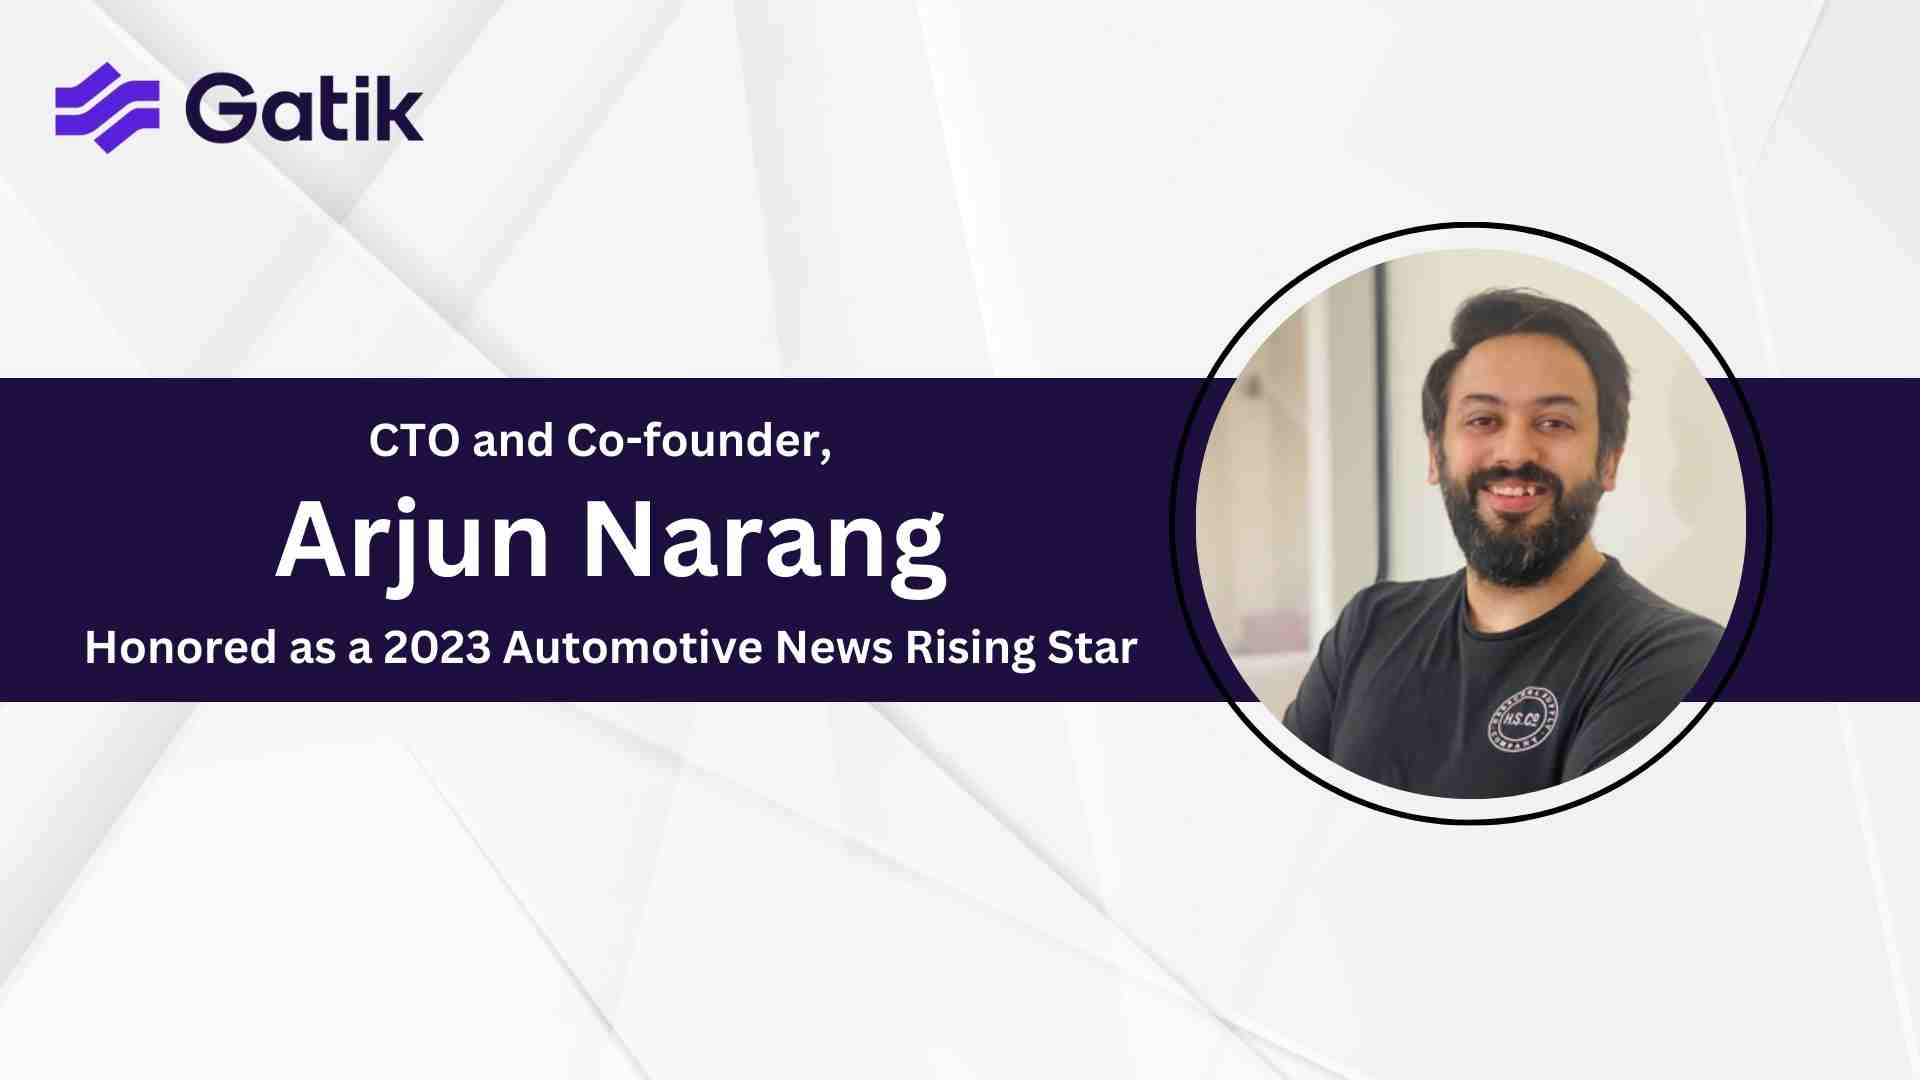 Gatik’s Chief Technology Officer and Co-founder, Arjun Narang, Honored as a 2023 Automotive News Rising Star